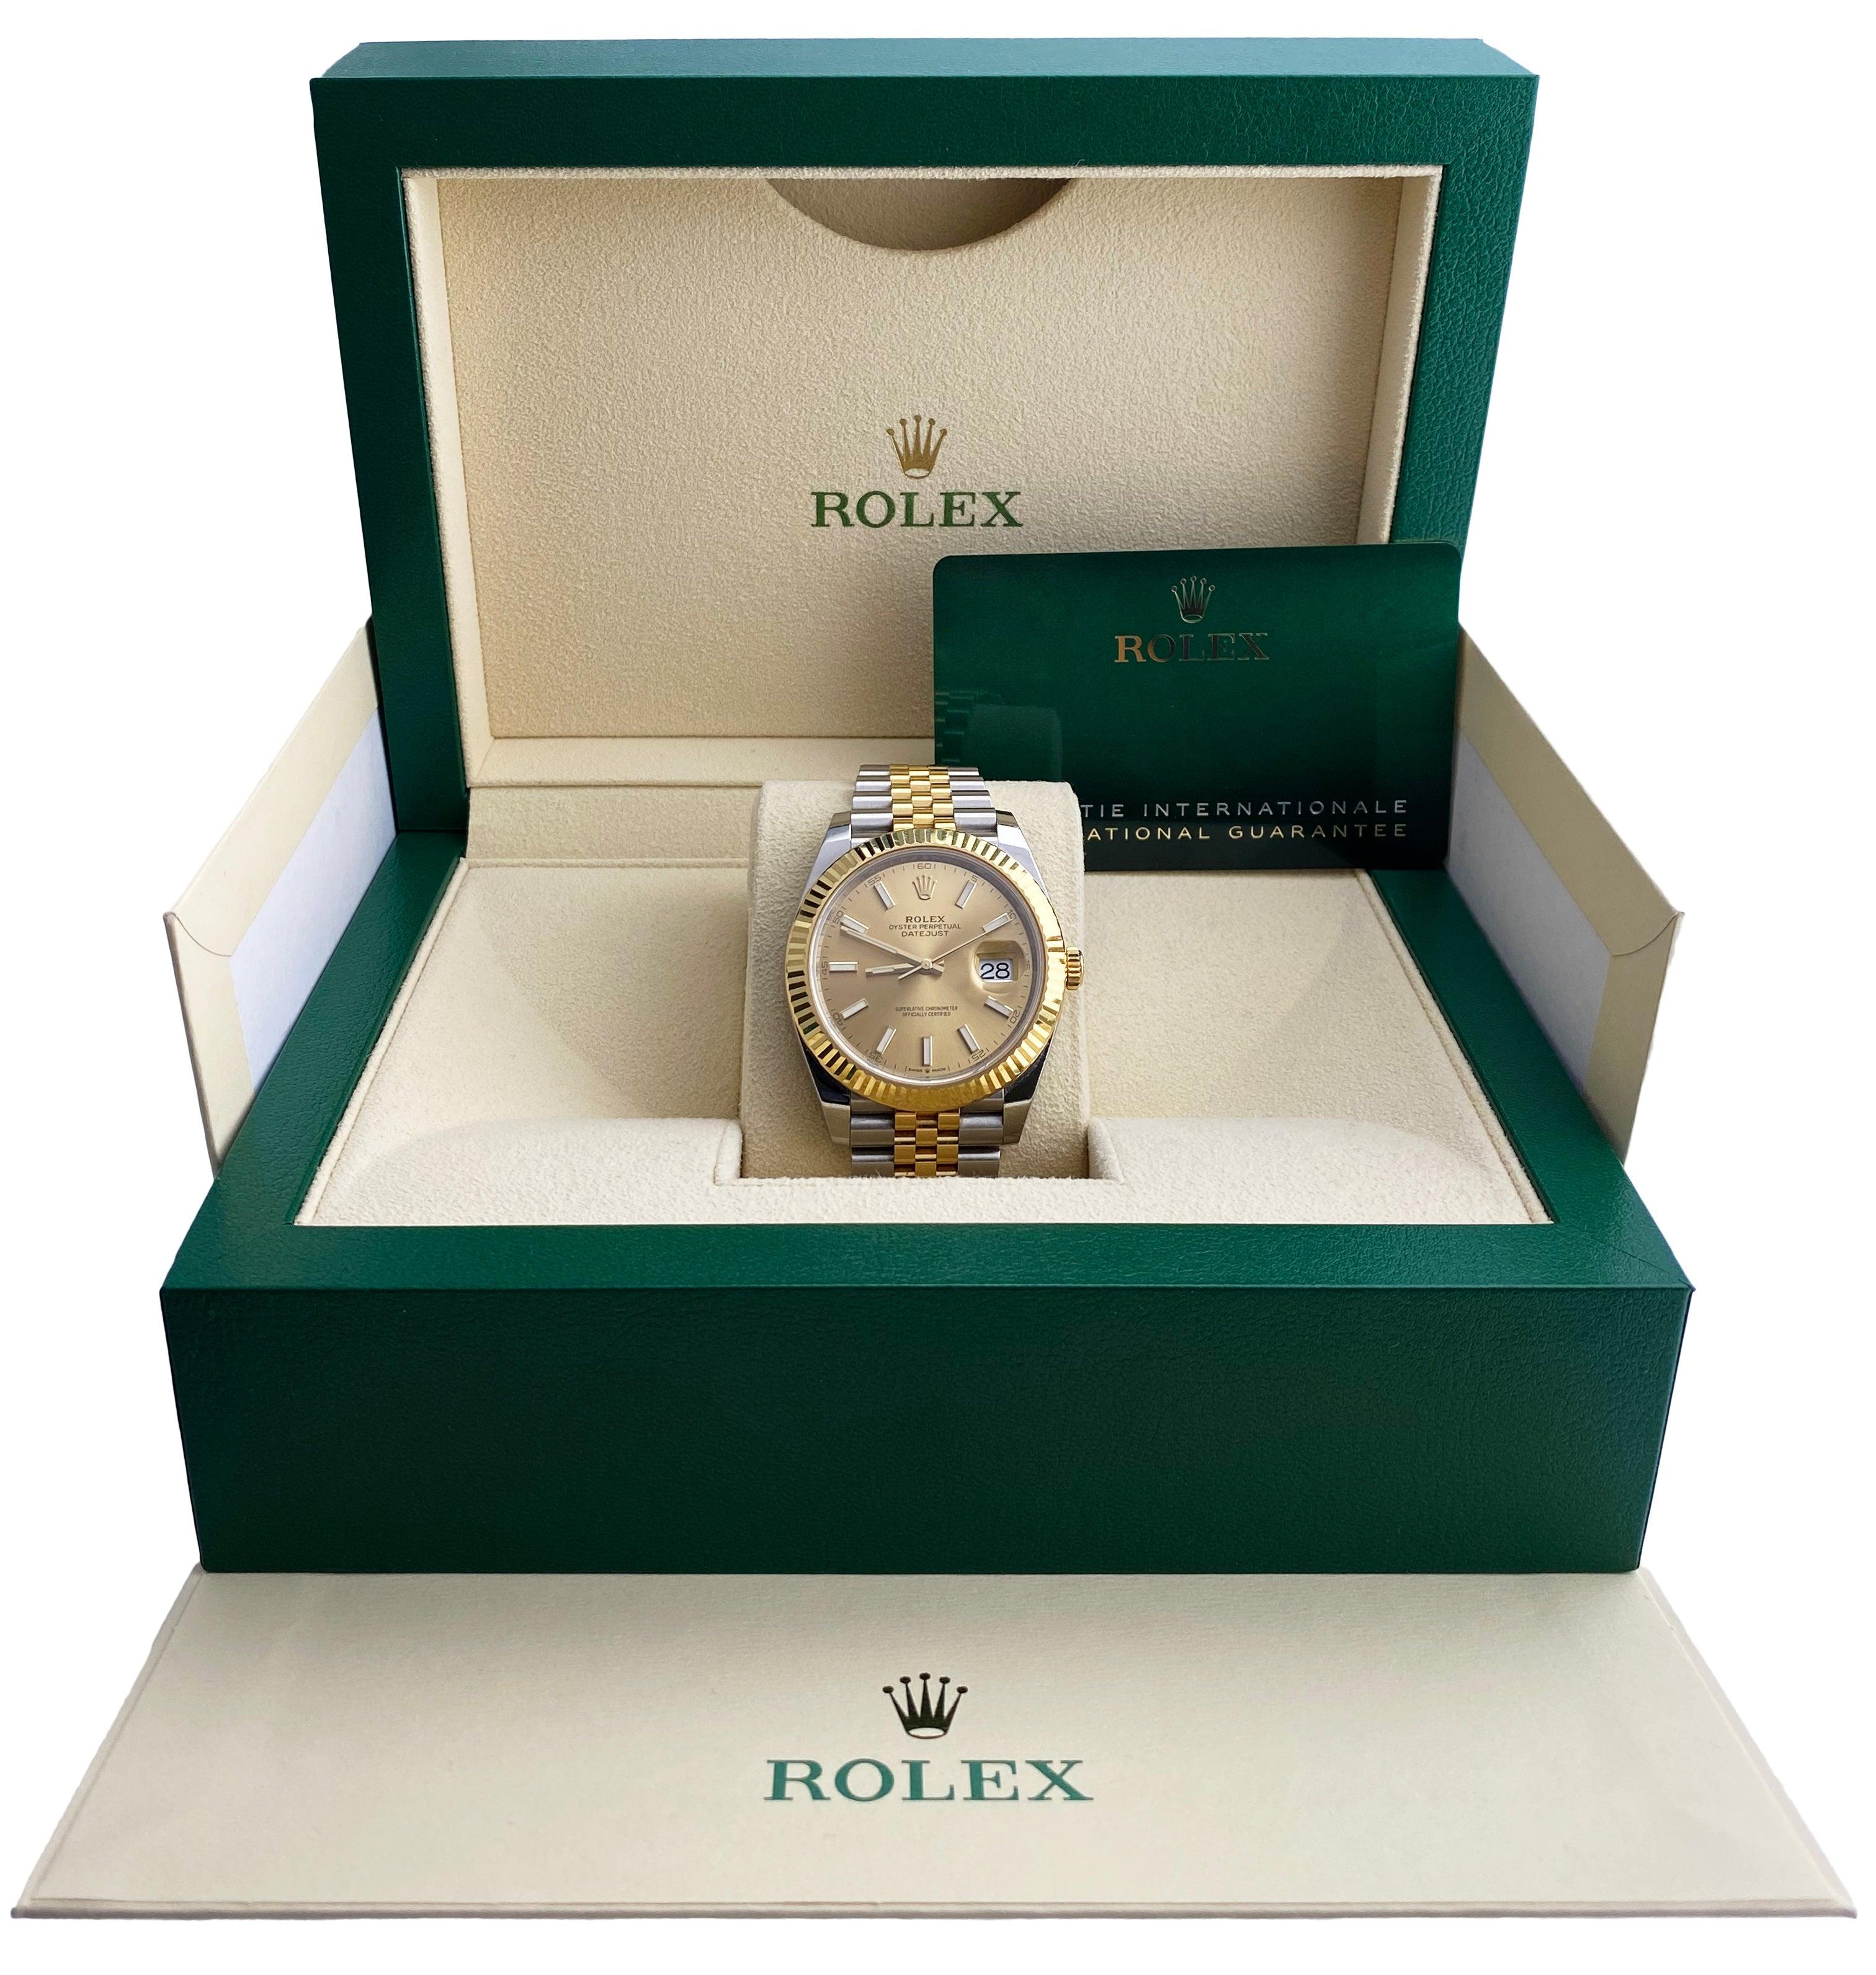 
Rolex Datejust 126333 Mens Watch. 41mm stainless steel case with 18K yellow gold fluted bezel. Champagne dial with gold hands and index hour index marker. Engraved rehaut. Date display at the 3 o'clock position. Minute markers on the outer